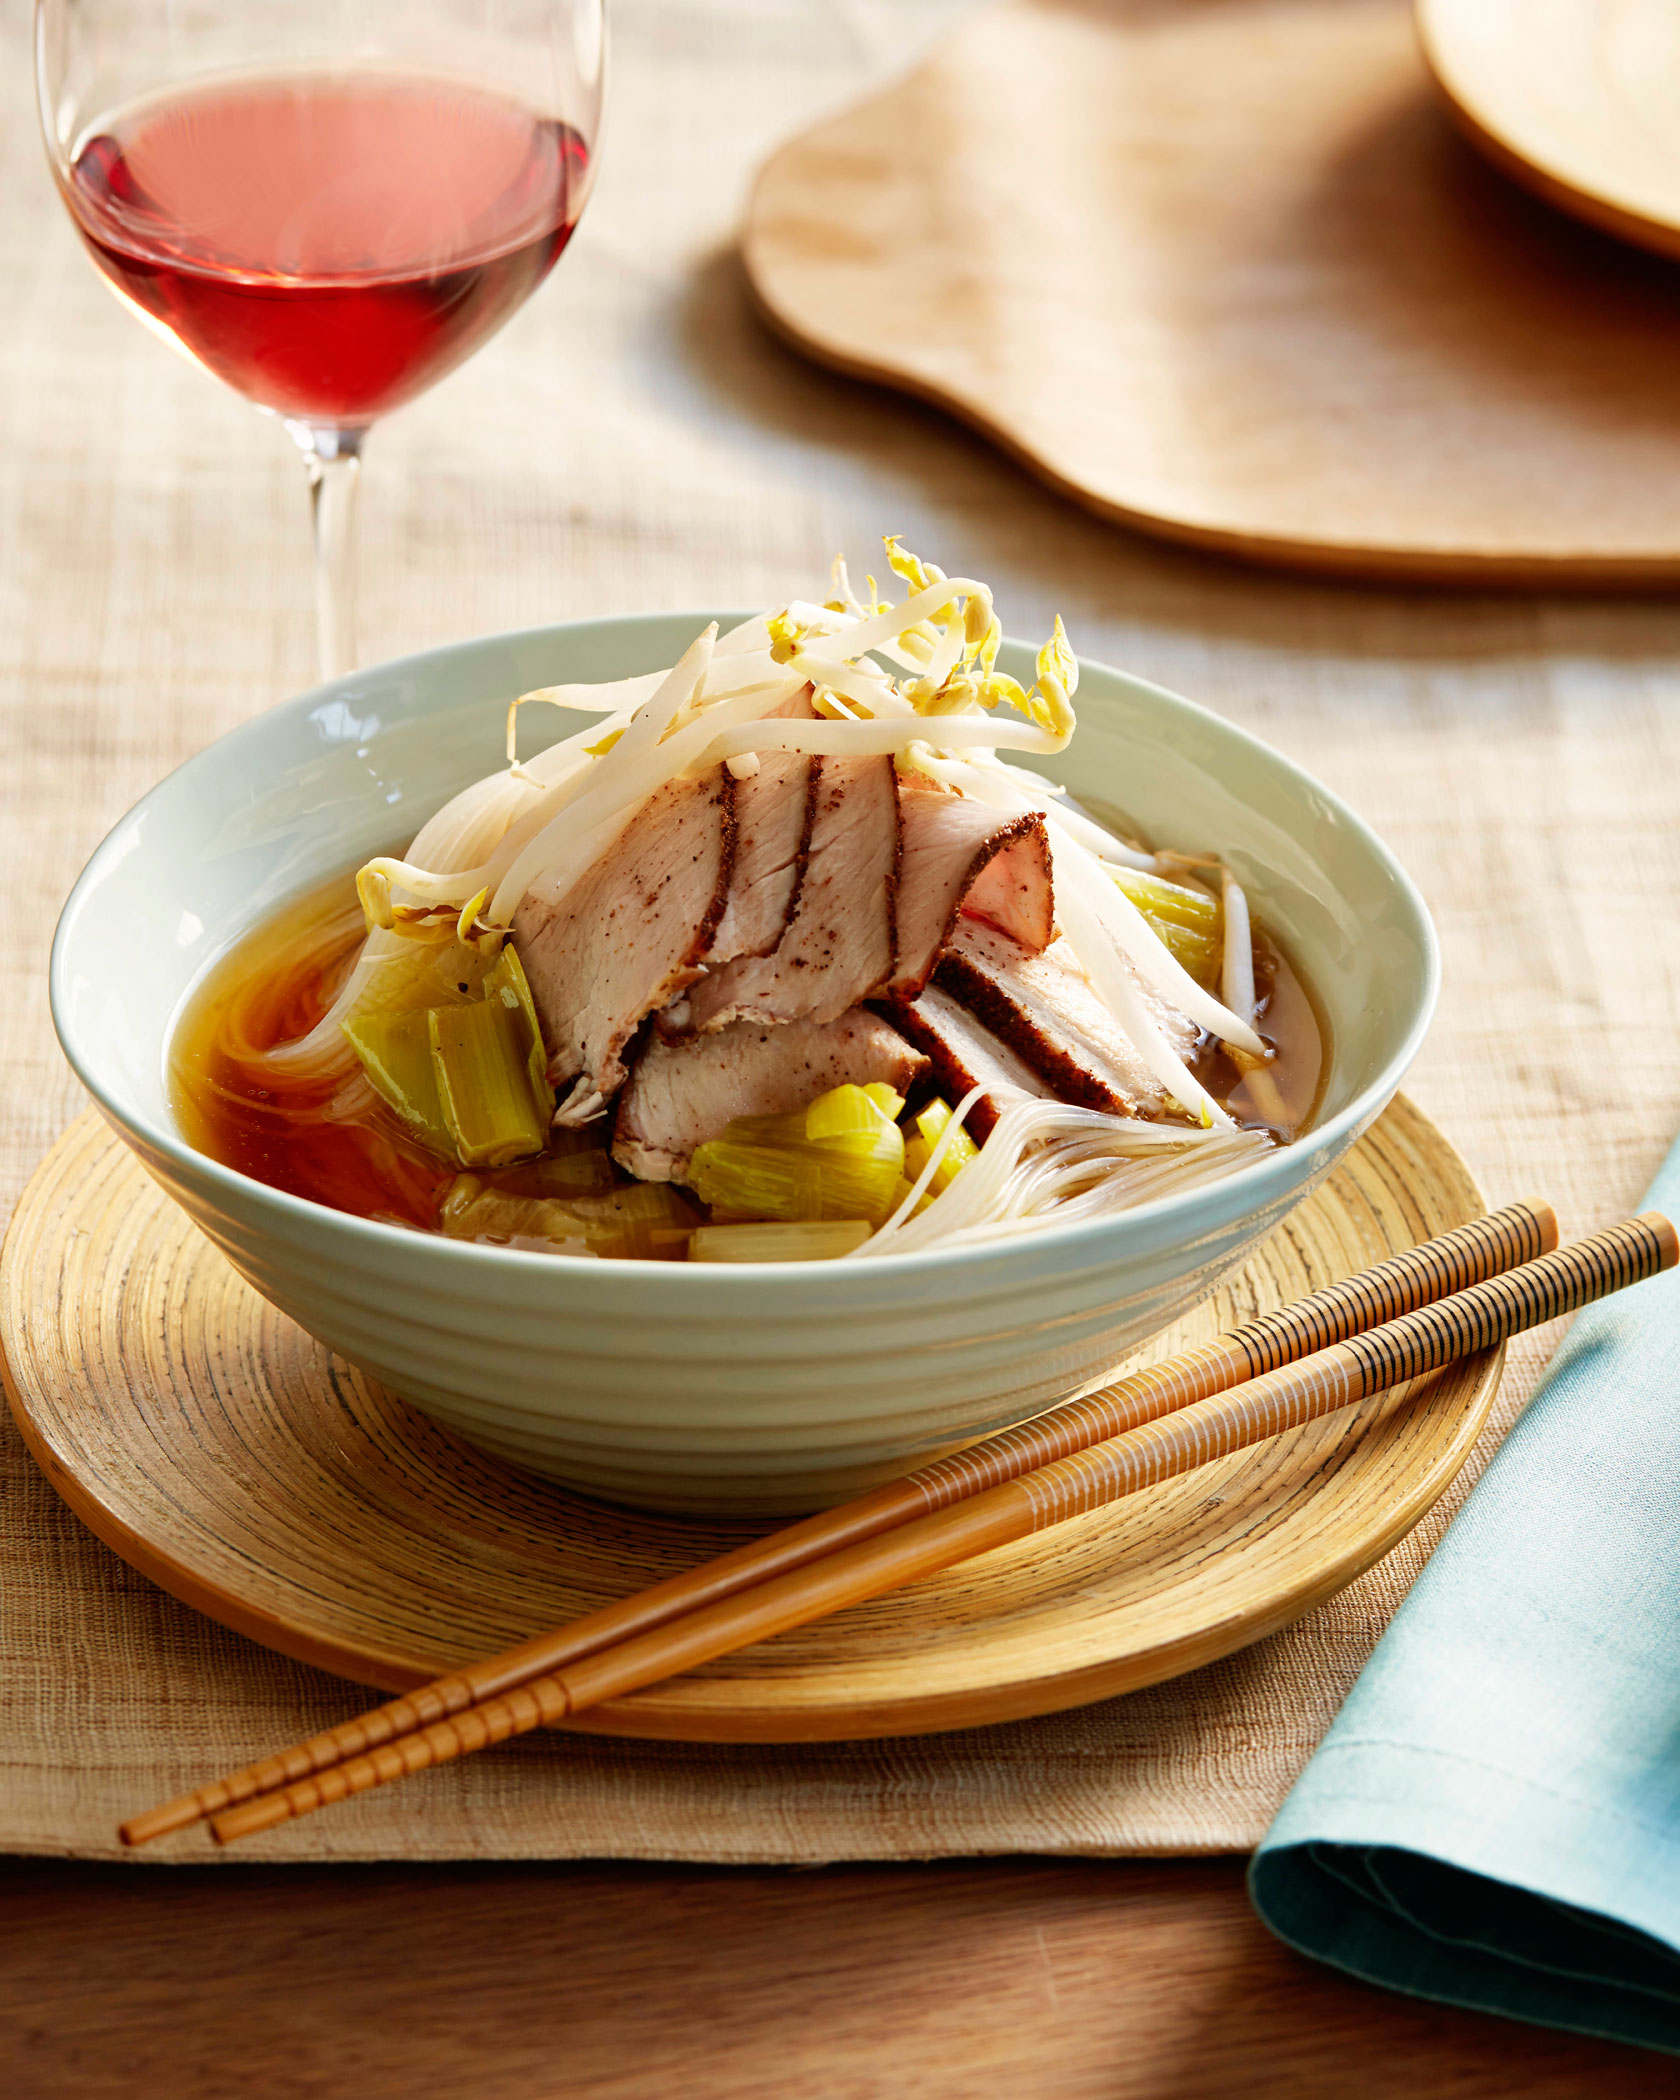 Rice Noodles with Five-Spice Pork and Braised Leeks in Anise Broth